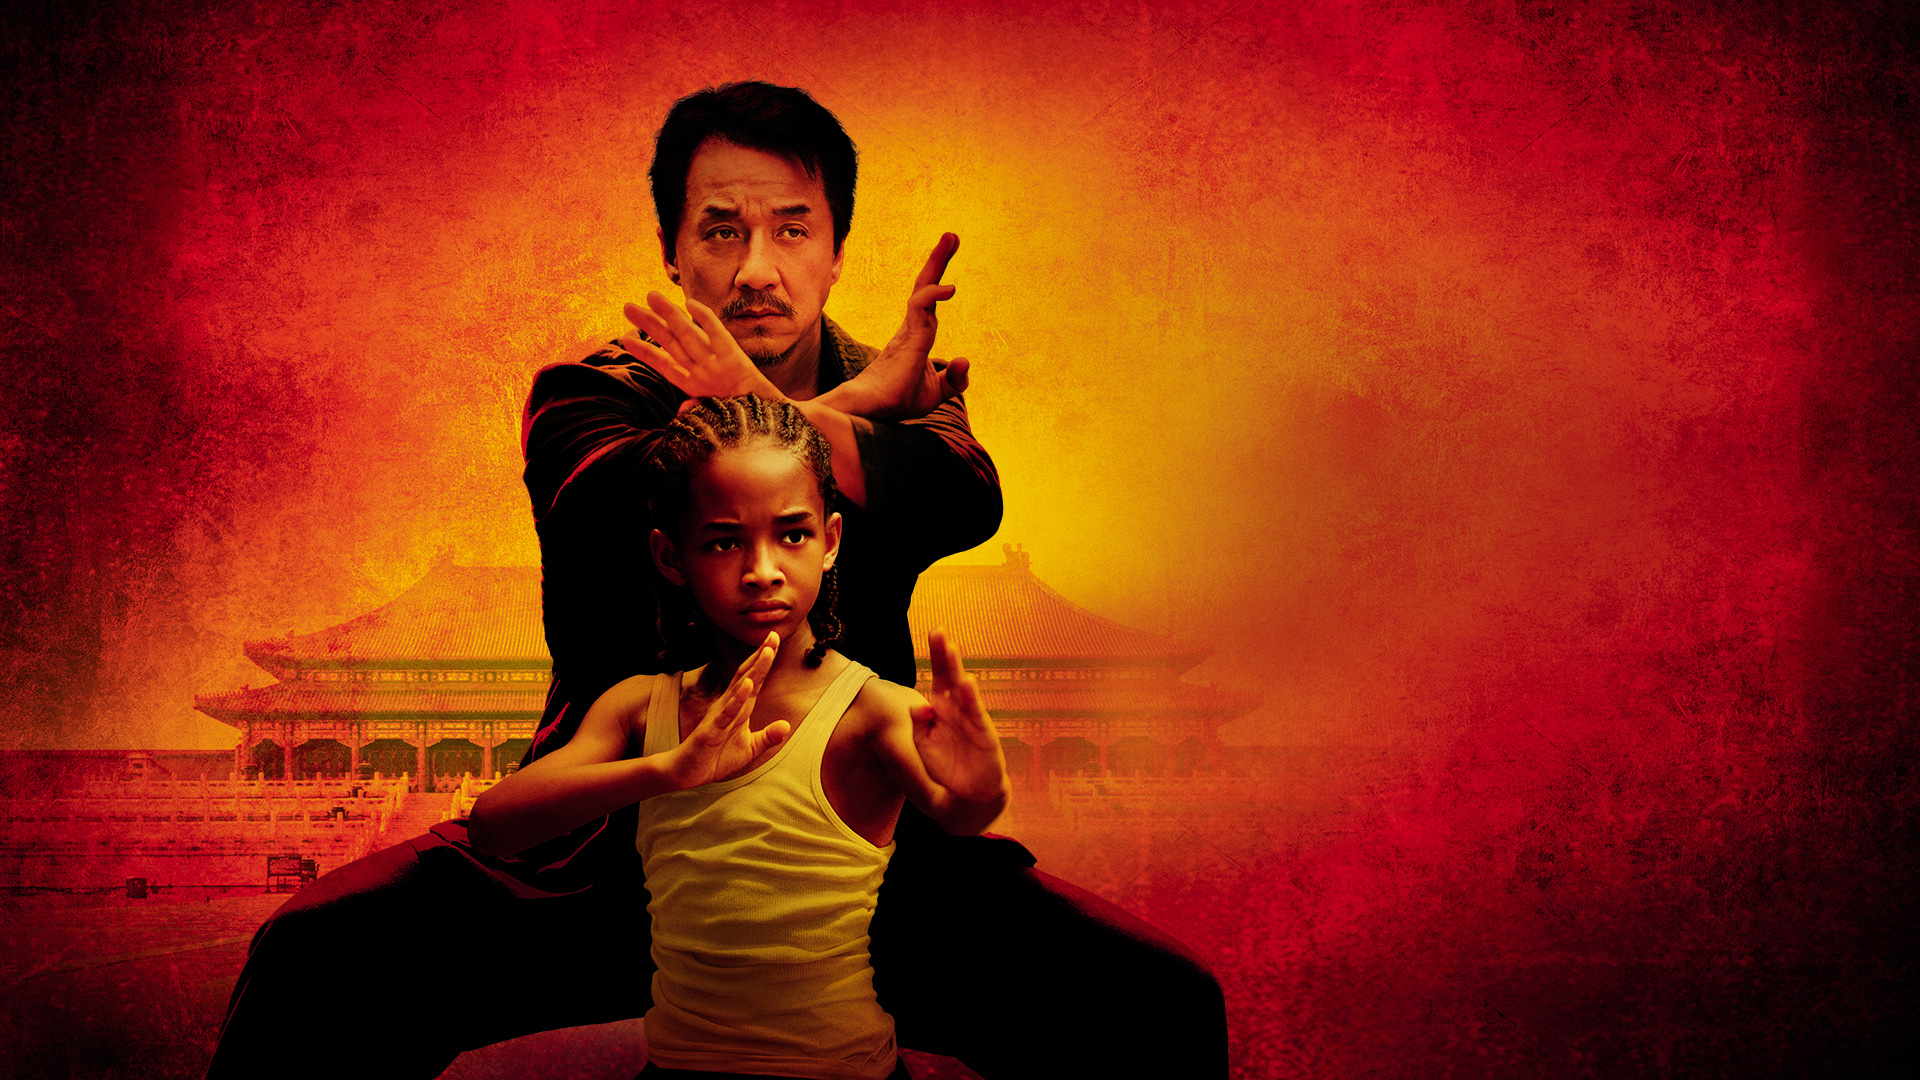 The Karate Kid 2010 Full HD Wallpaper and Background